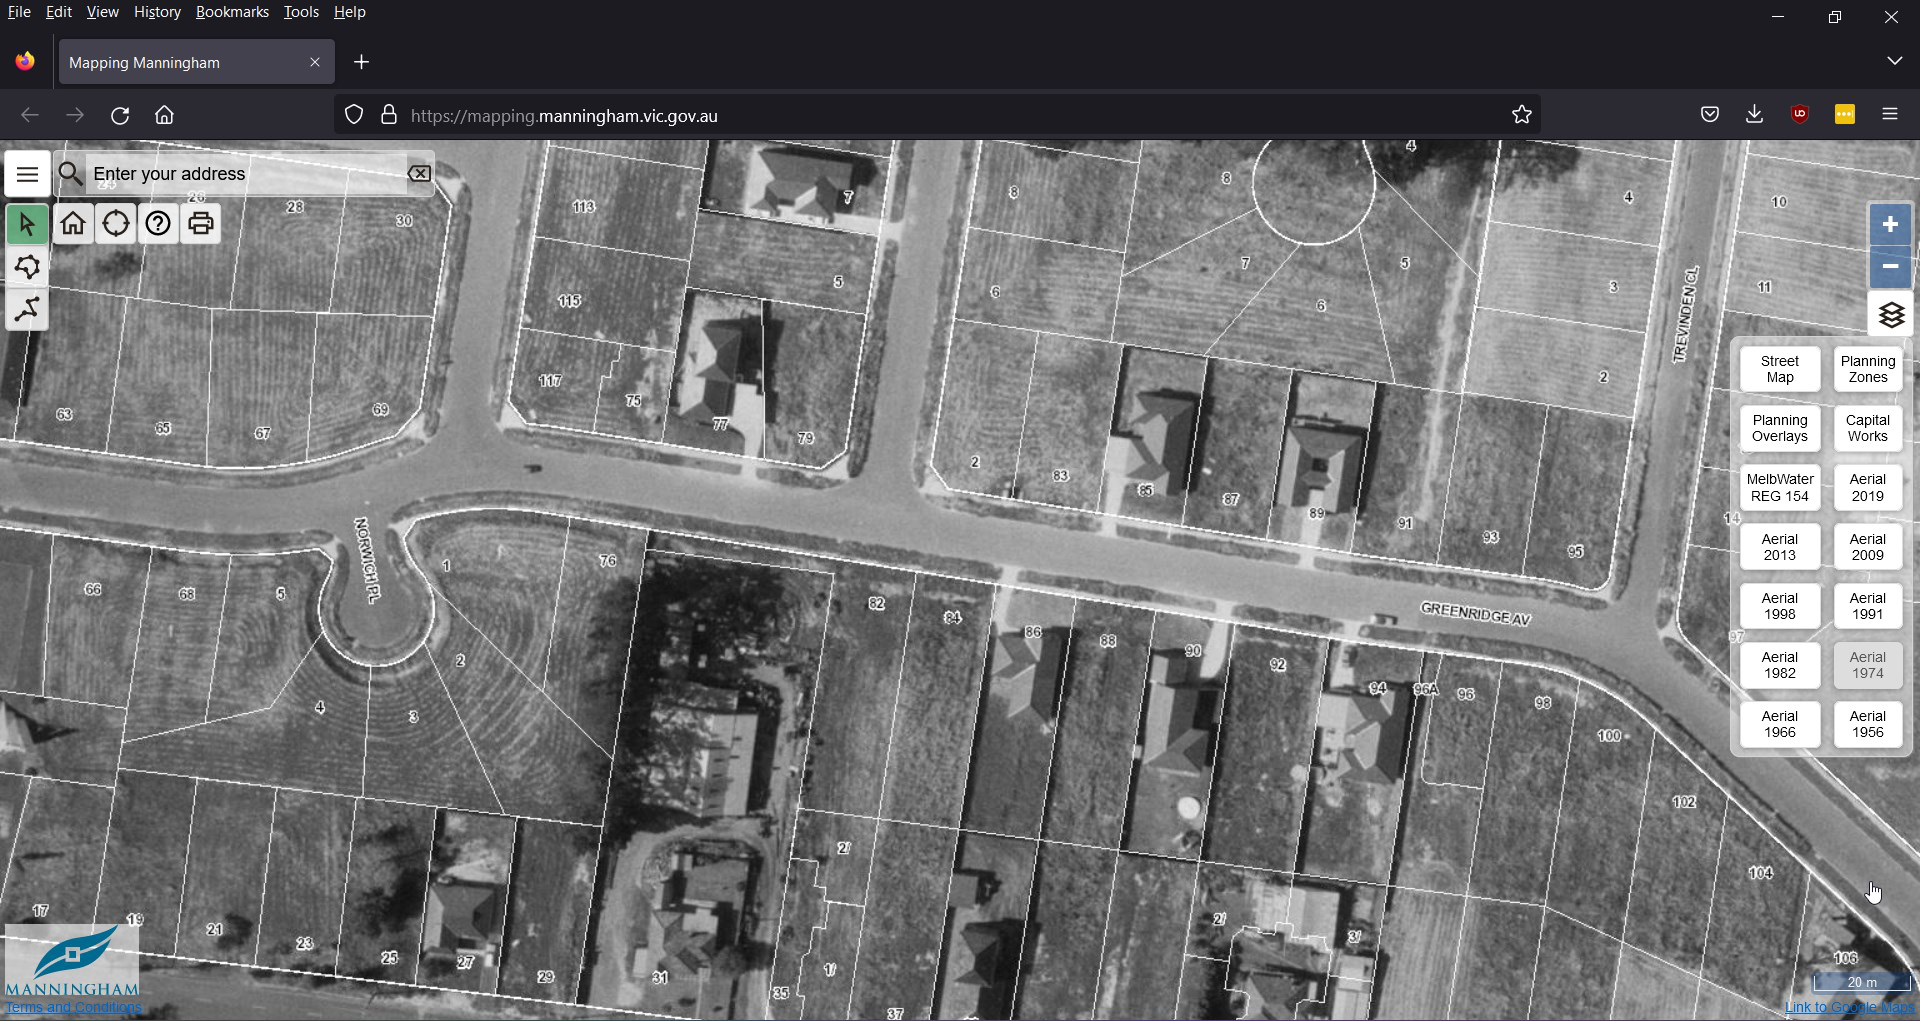 Screen capture of the Mapping Manningham website showing the quality of images.